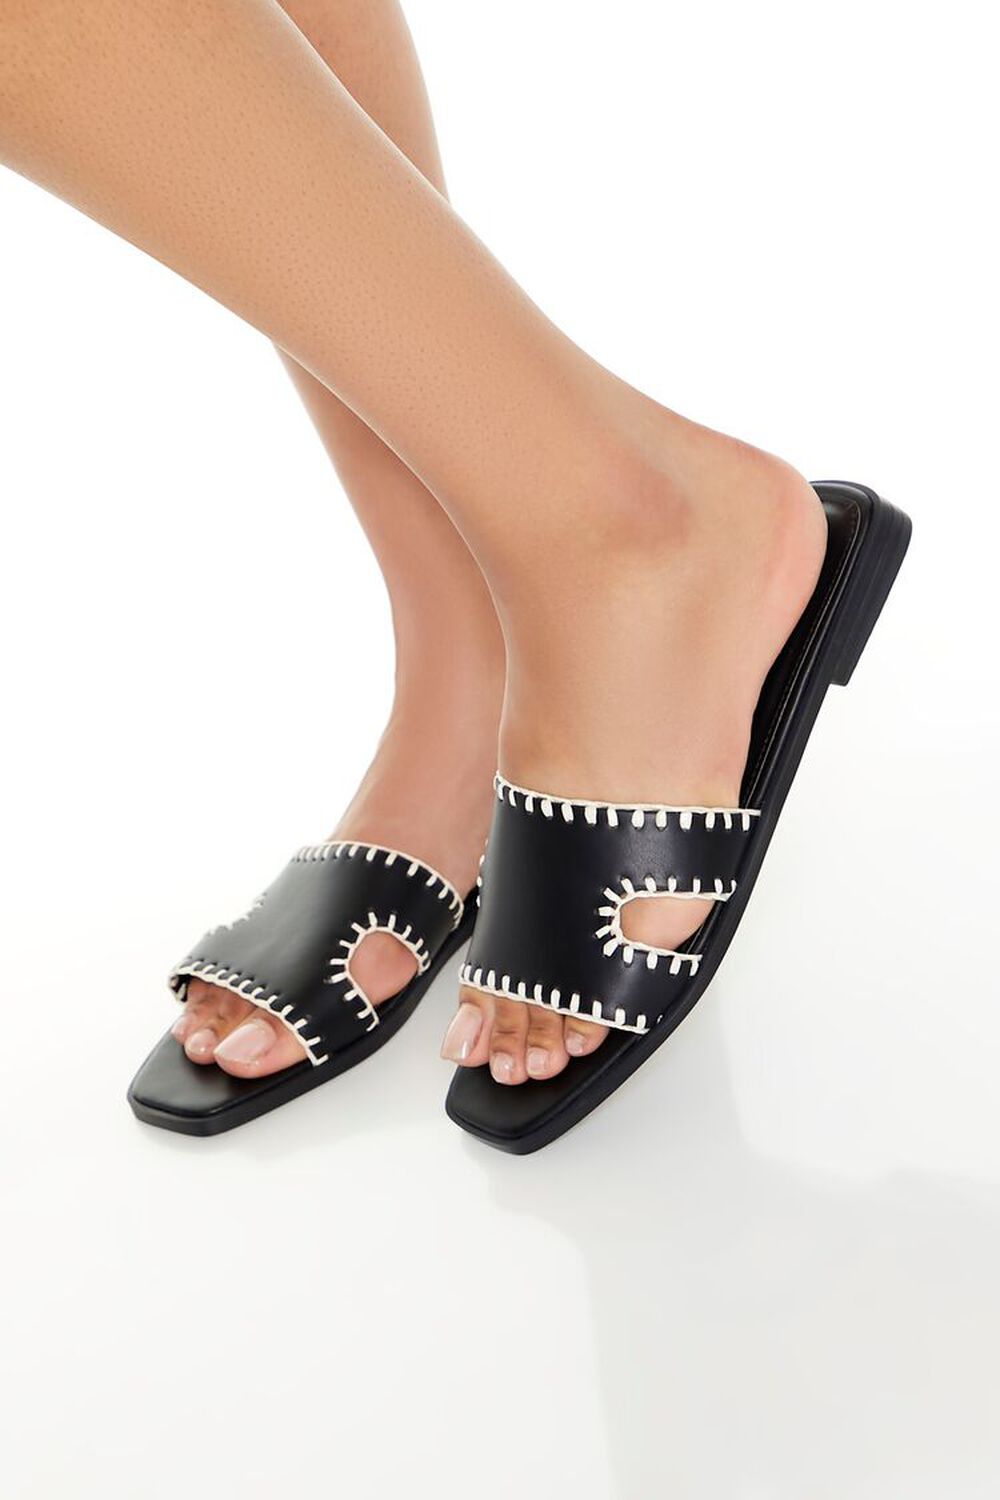 BLACK Embroidered Faux Leather Sandals, image 1